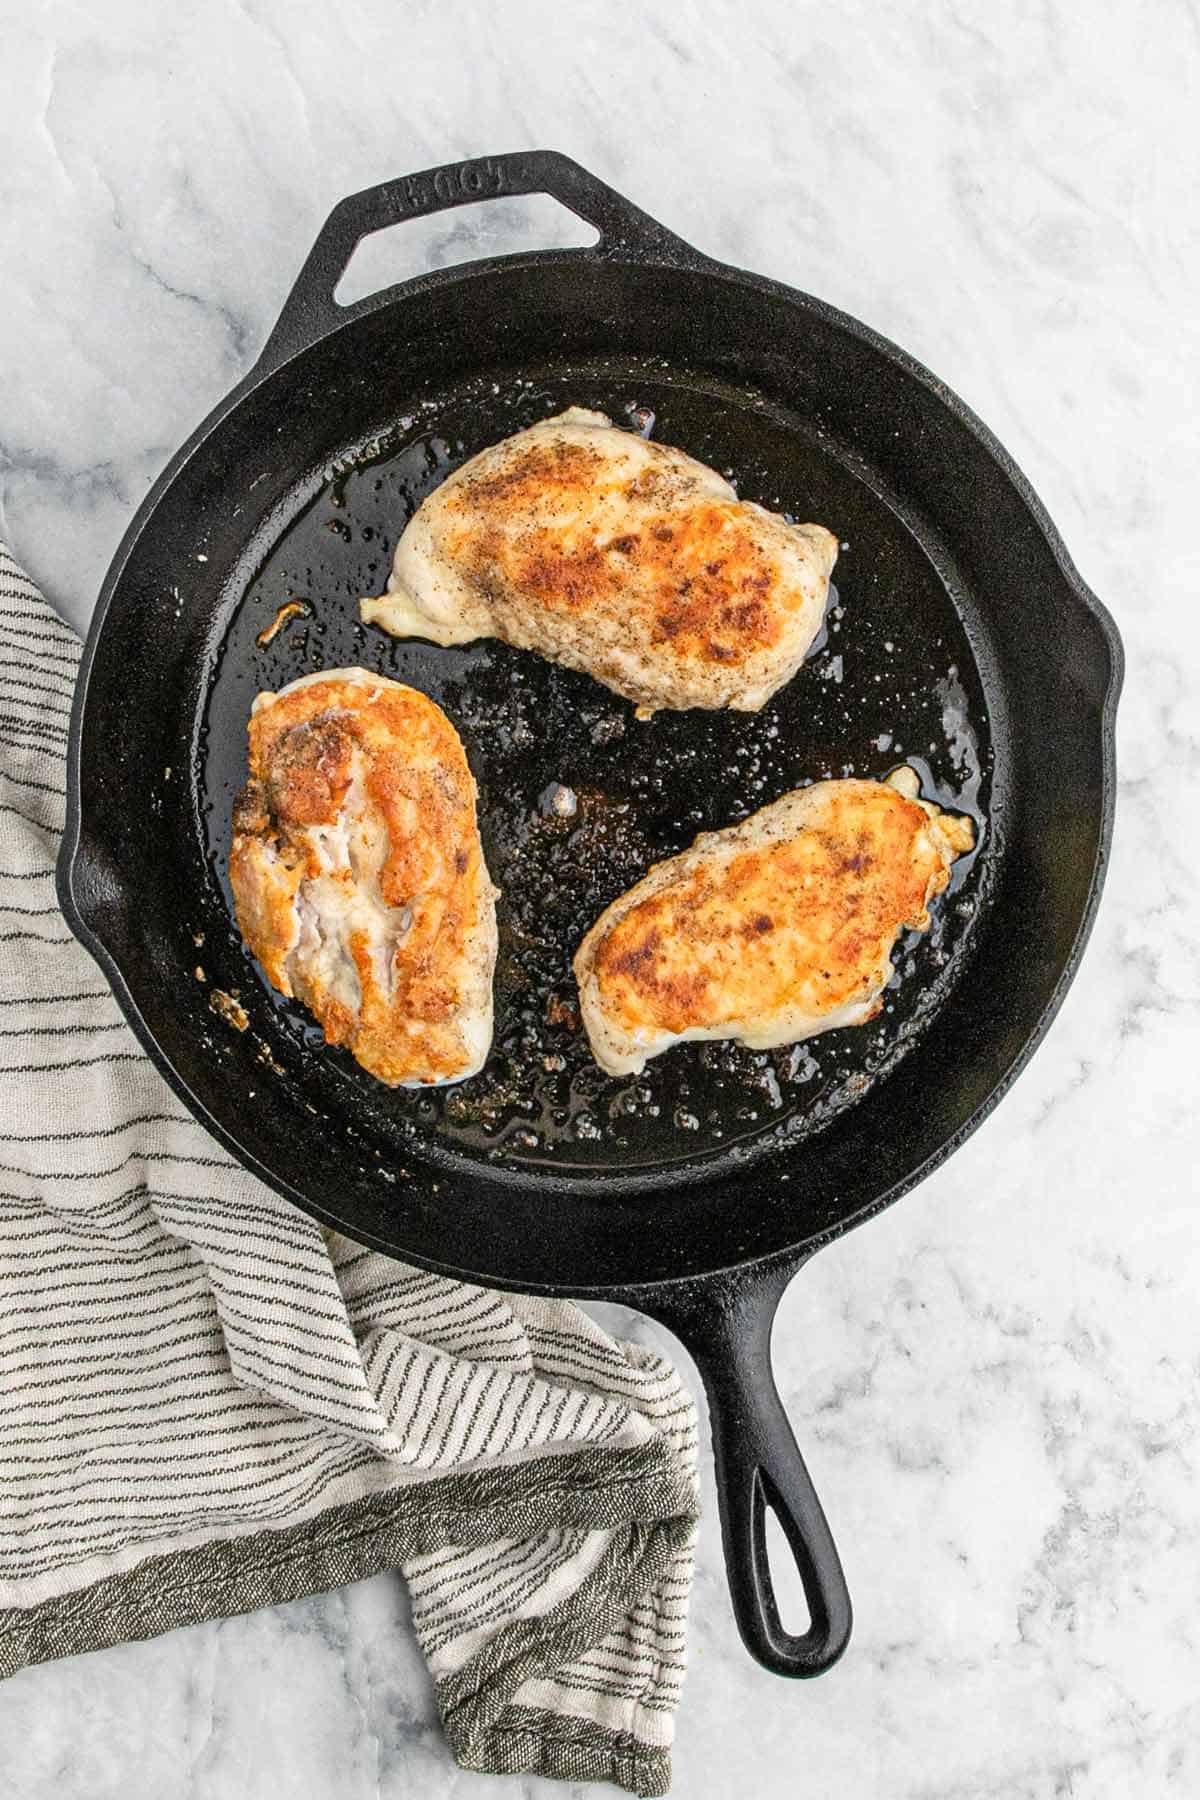 Chicken breasts cooking in a skillet.